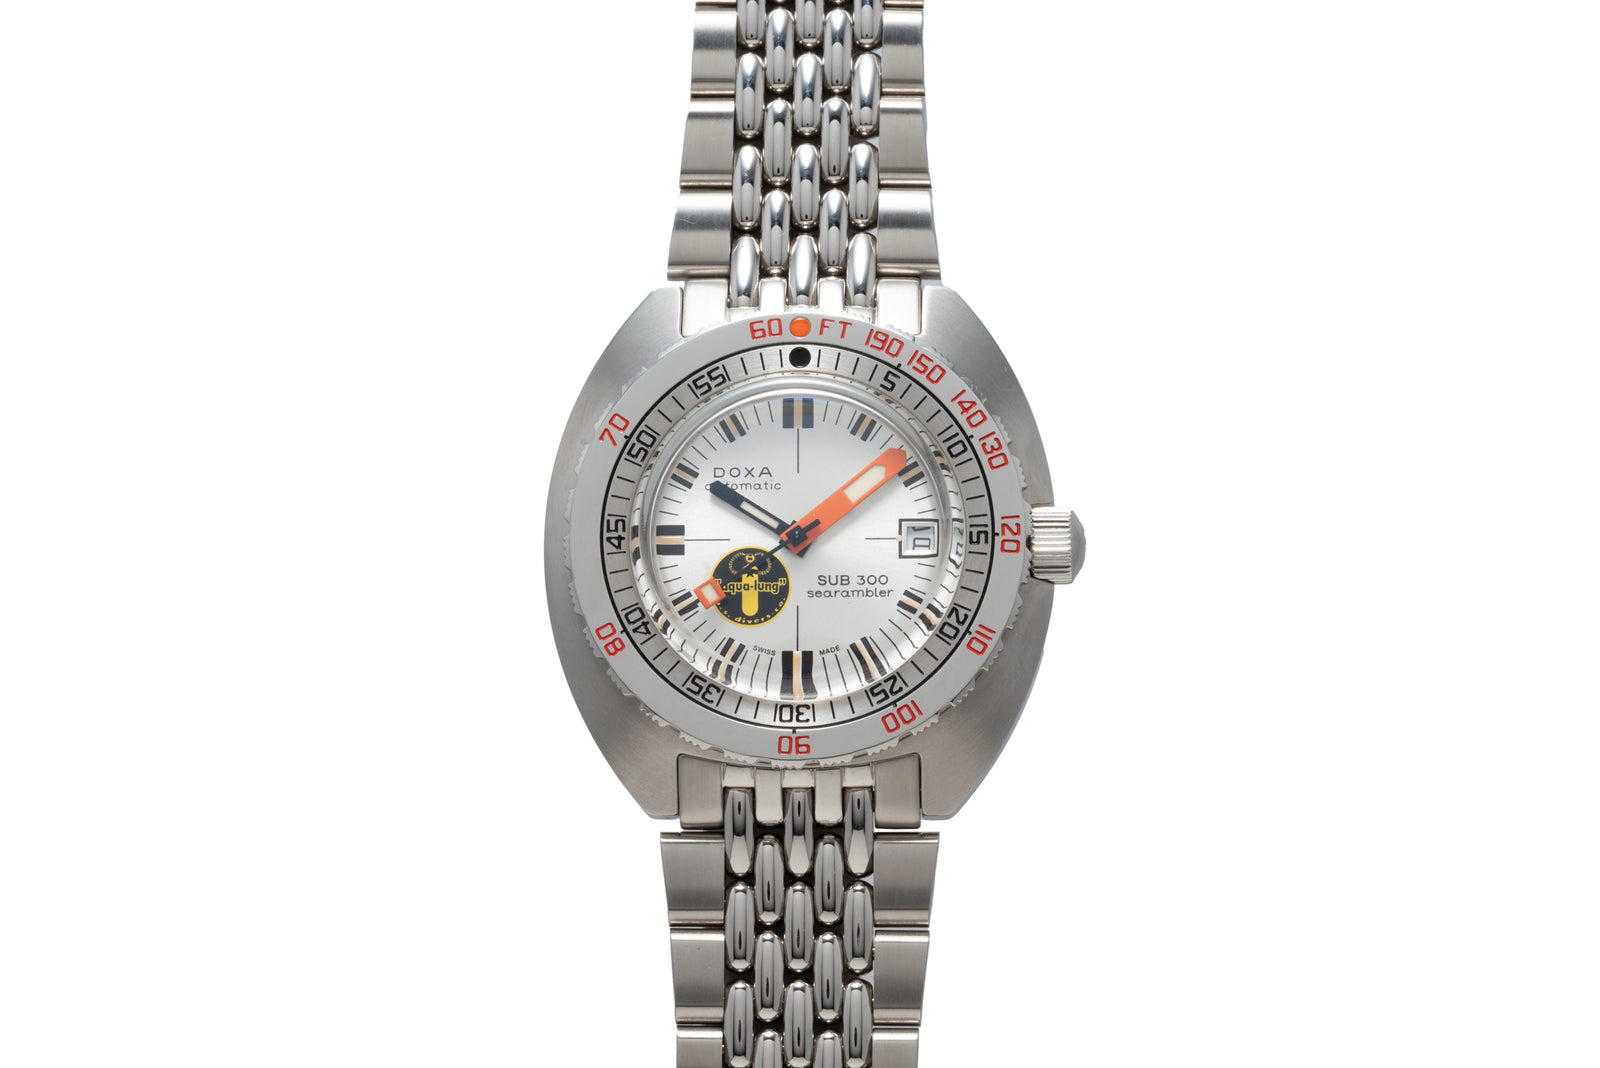 DOXA Sub 300 'Silver Lung' Limited Edition